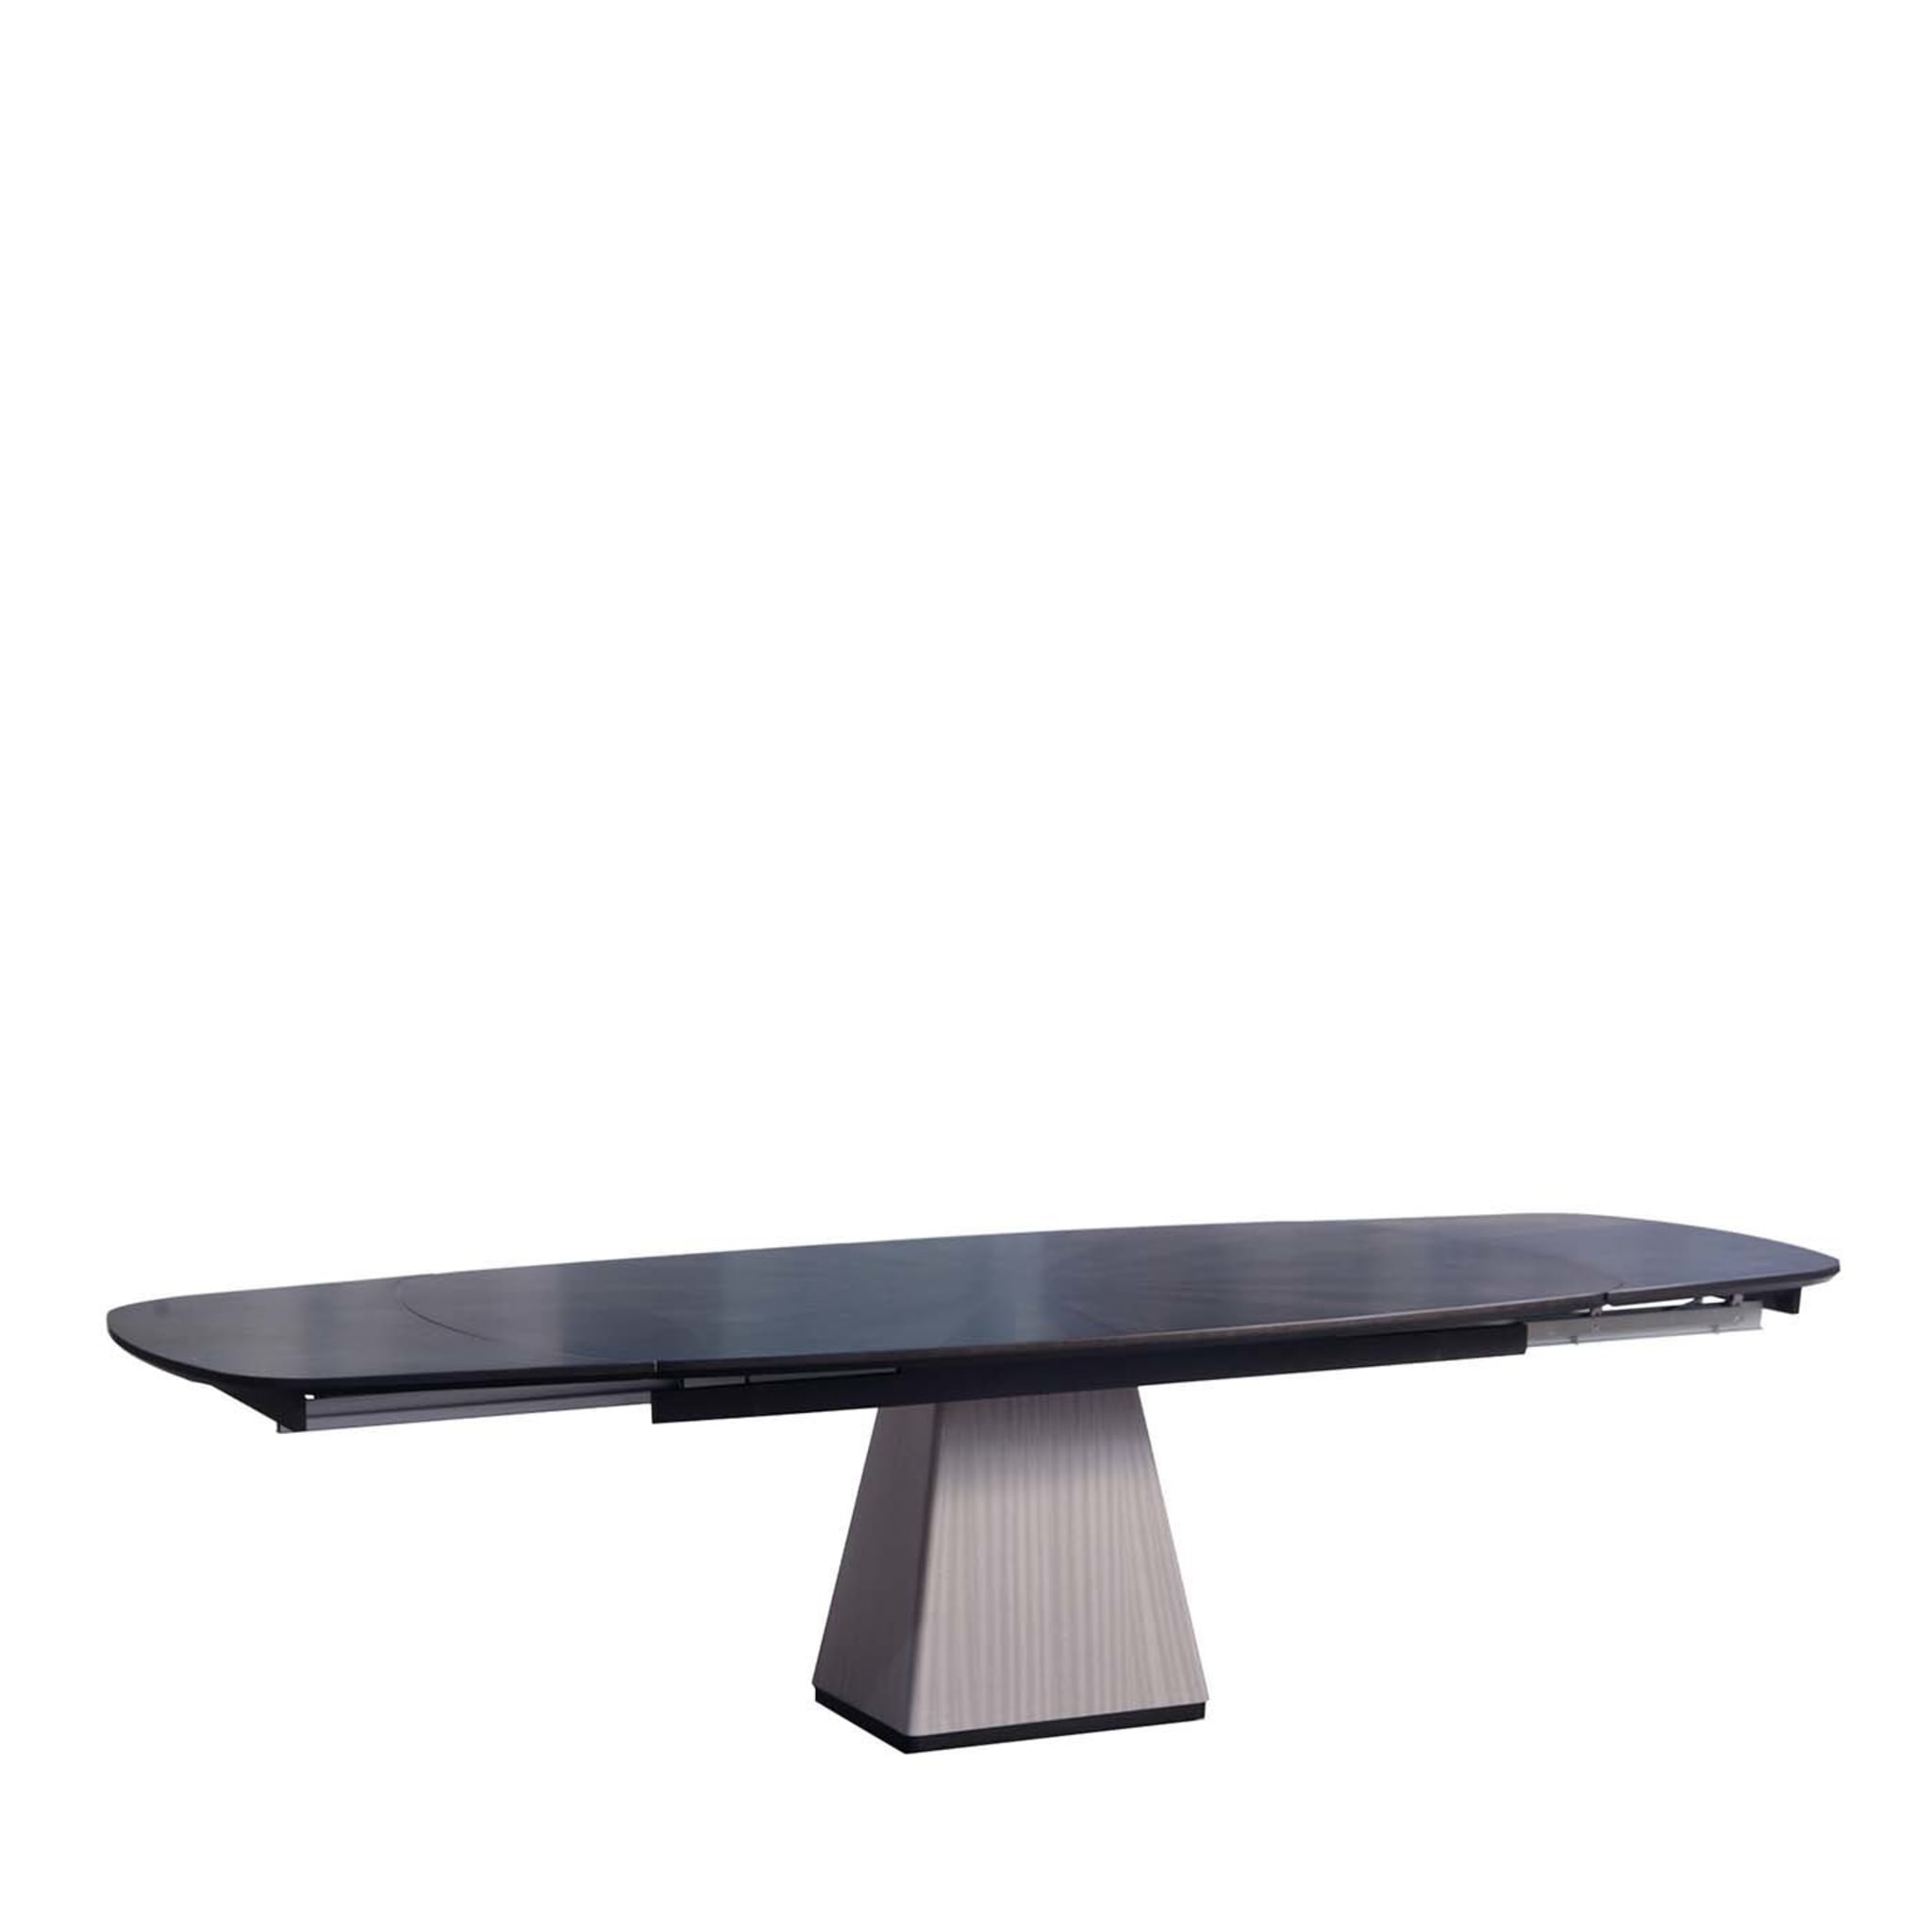 2019 Extendable Table - Main view